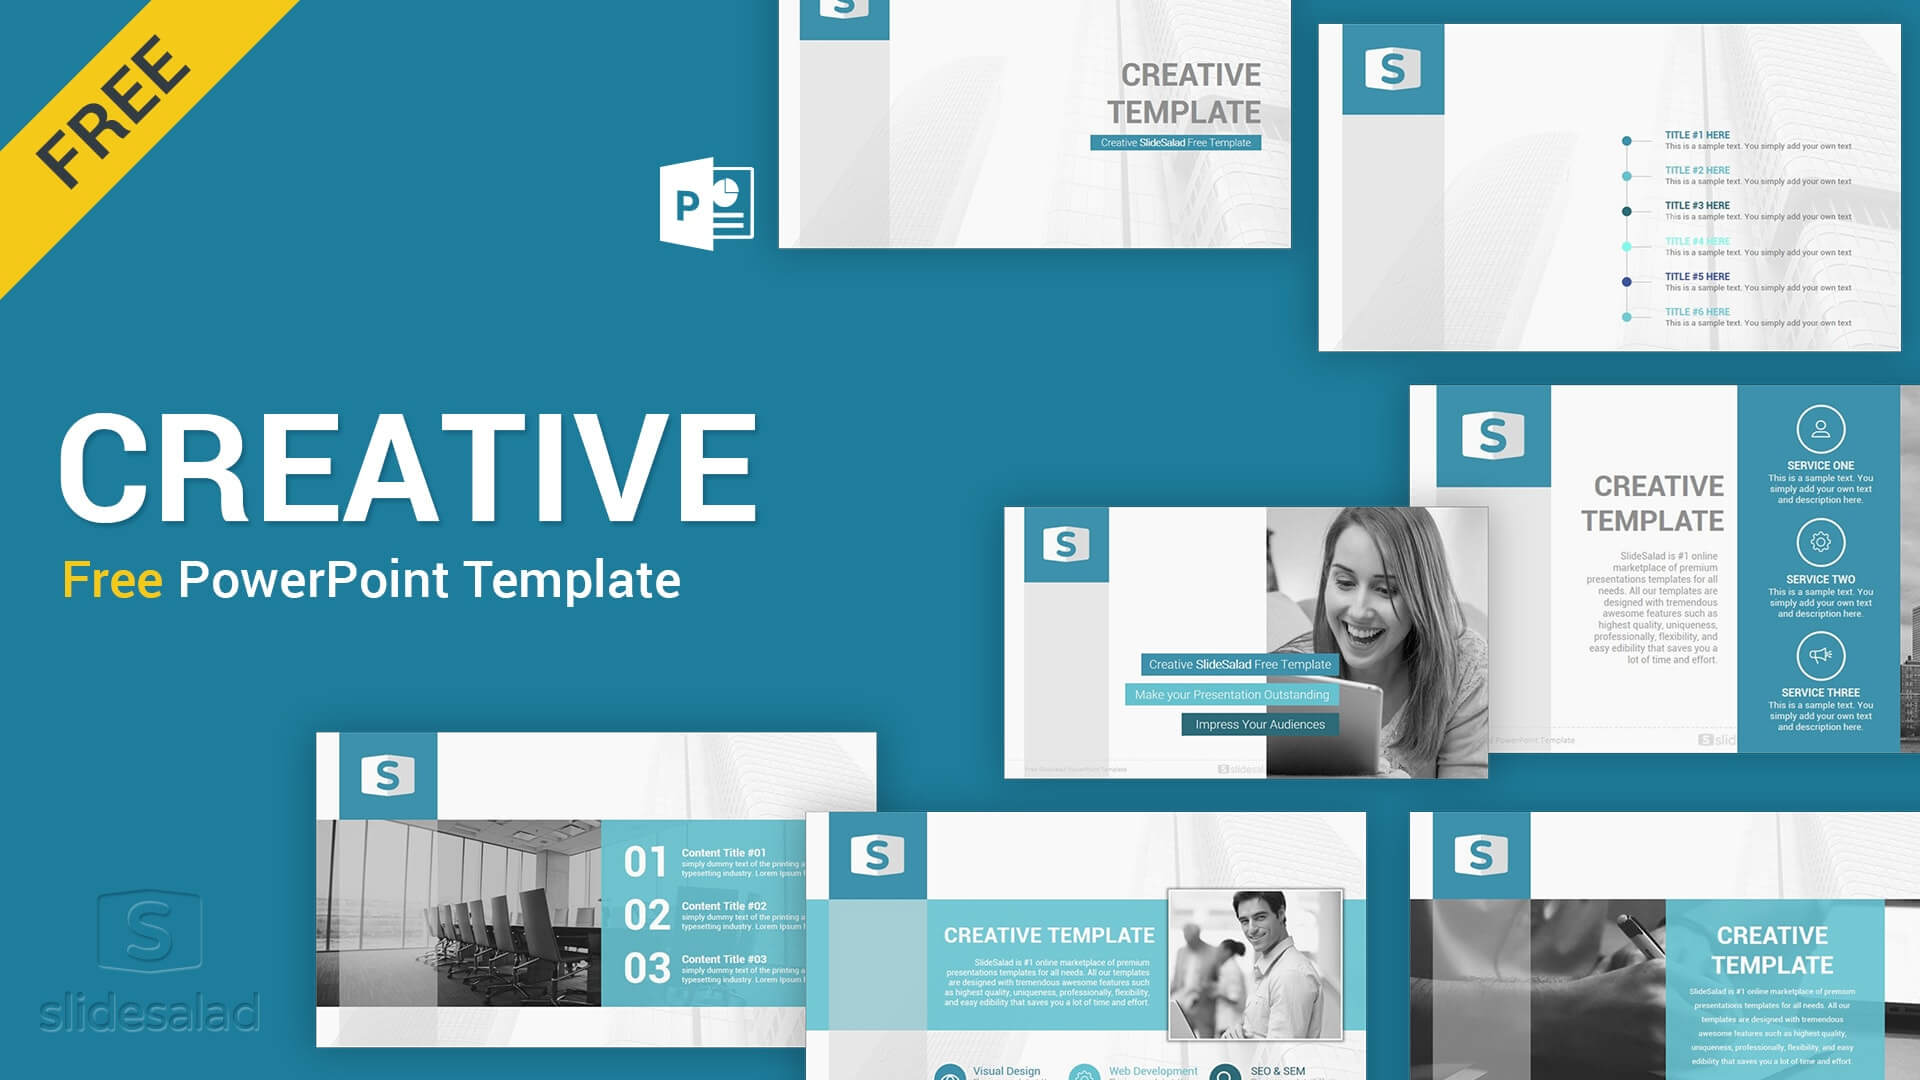 Creative Free Download Powerpoint Template – Slidesalad Throughout Free Powerpoint Presentation Templates Downloads